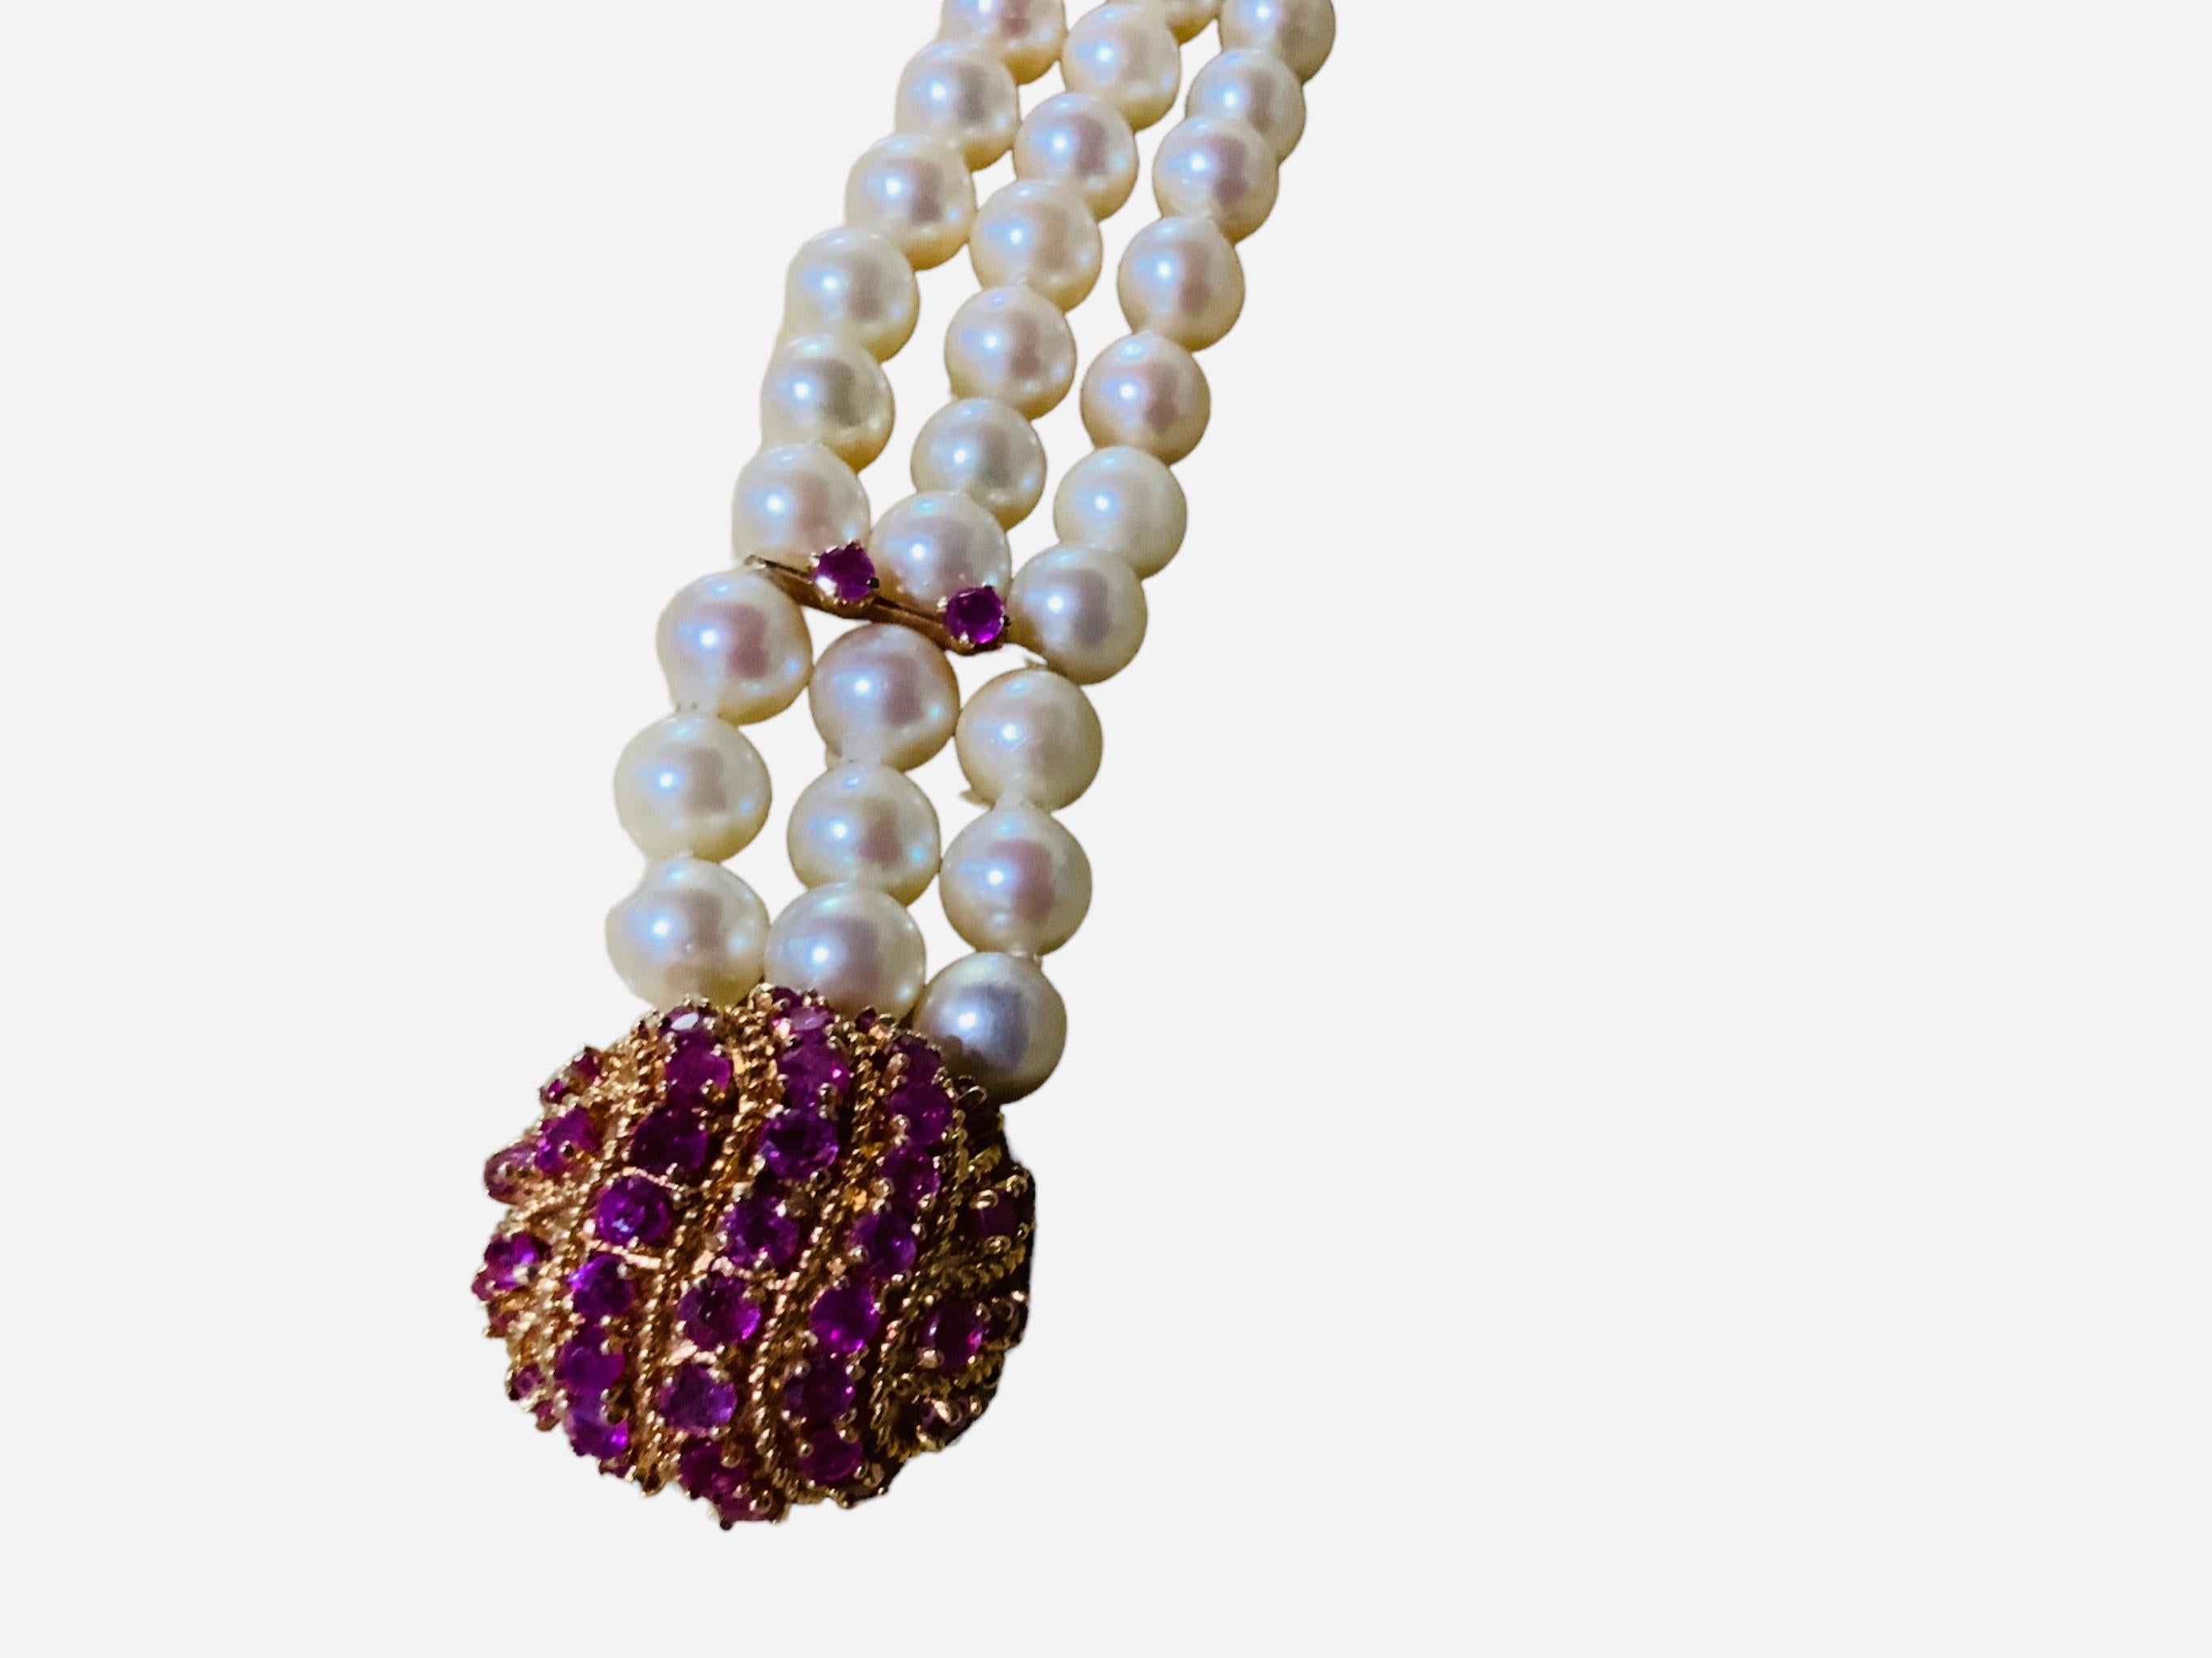 This is a Japanese 14K gold culture pearls and rubies bracelet. It depicts three strands of pearls, for a total of 60 pearls. Each pearl measuring between 7.0-7.4mm each one. Two rubies ( 3.1mm in diameter) in 14K gold prongs setting adorn after